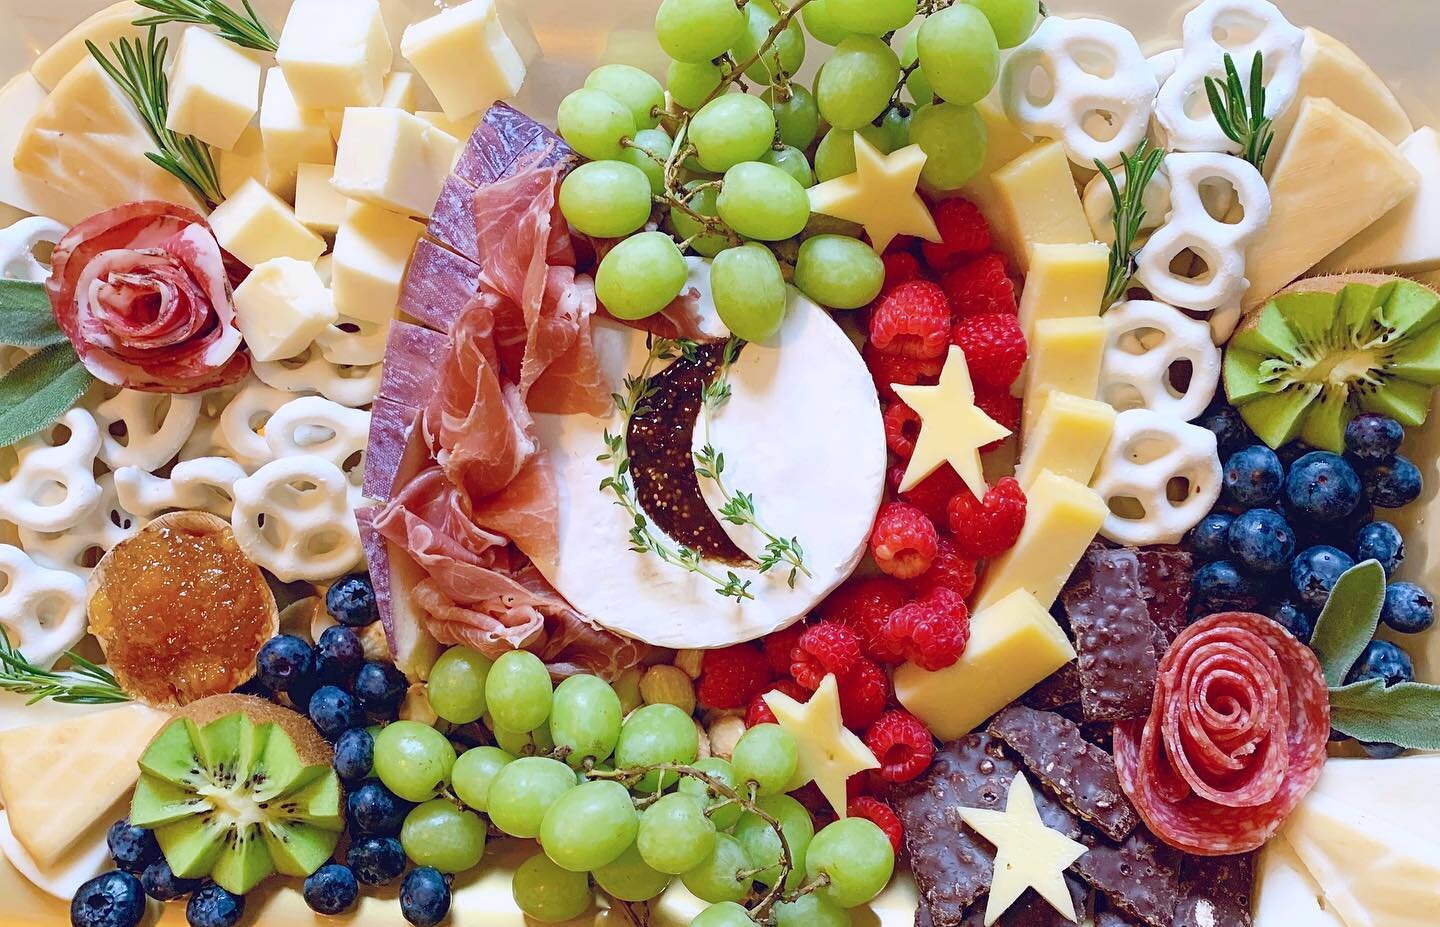 You want charcuterie boards? Cheese Garden has them! We are so excited to partner with Cheese Garden to customize beautiful grazing boards for your picnics! 🍇🧀